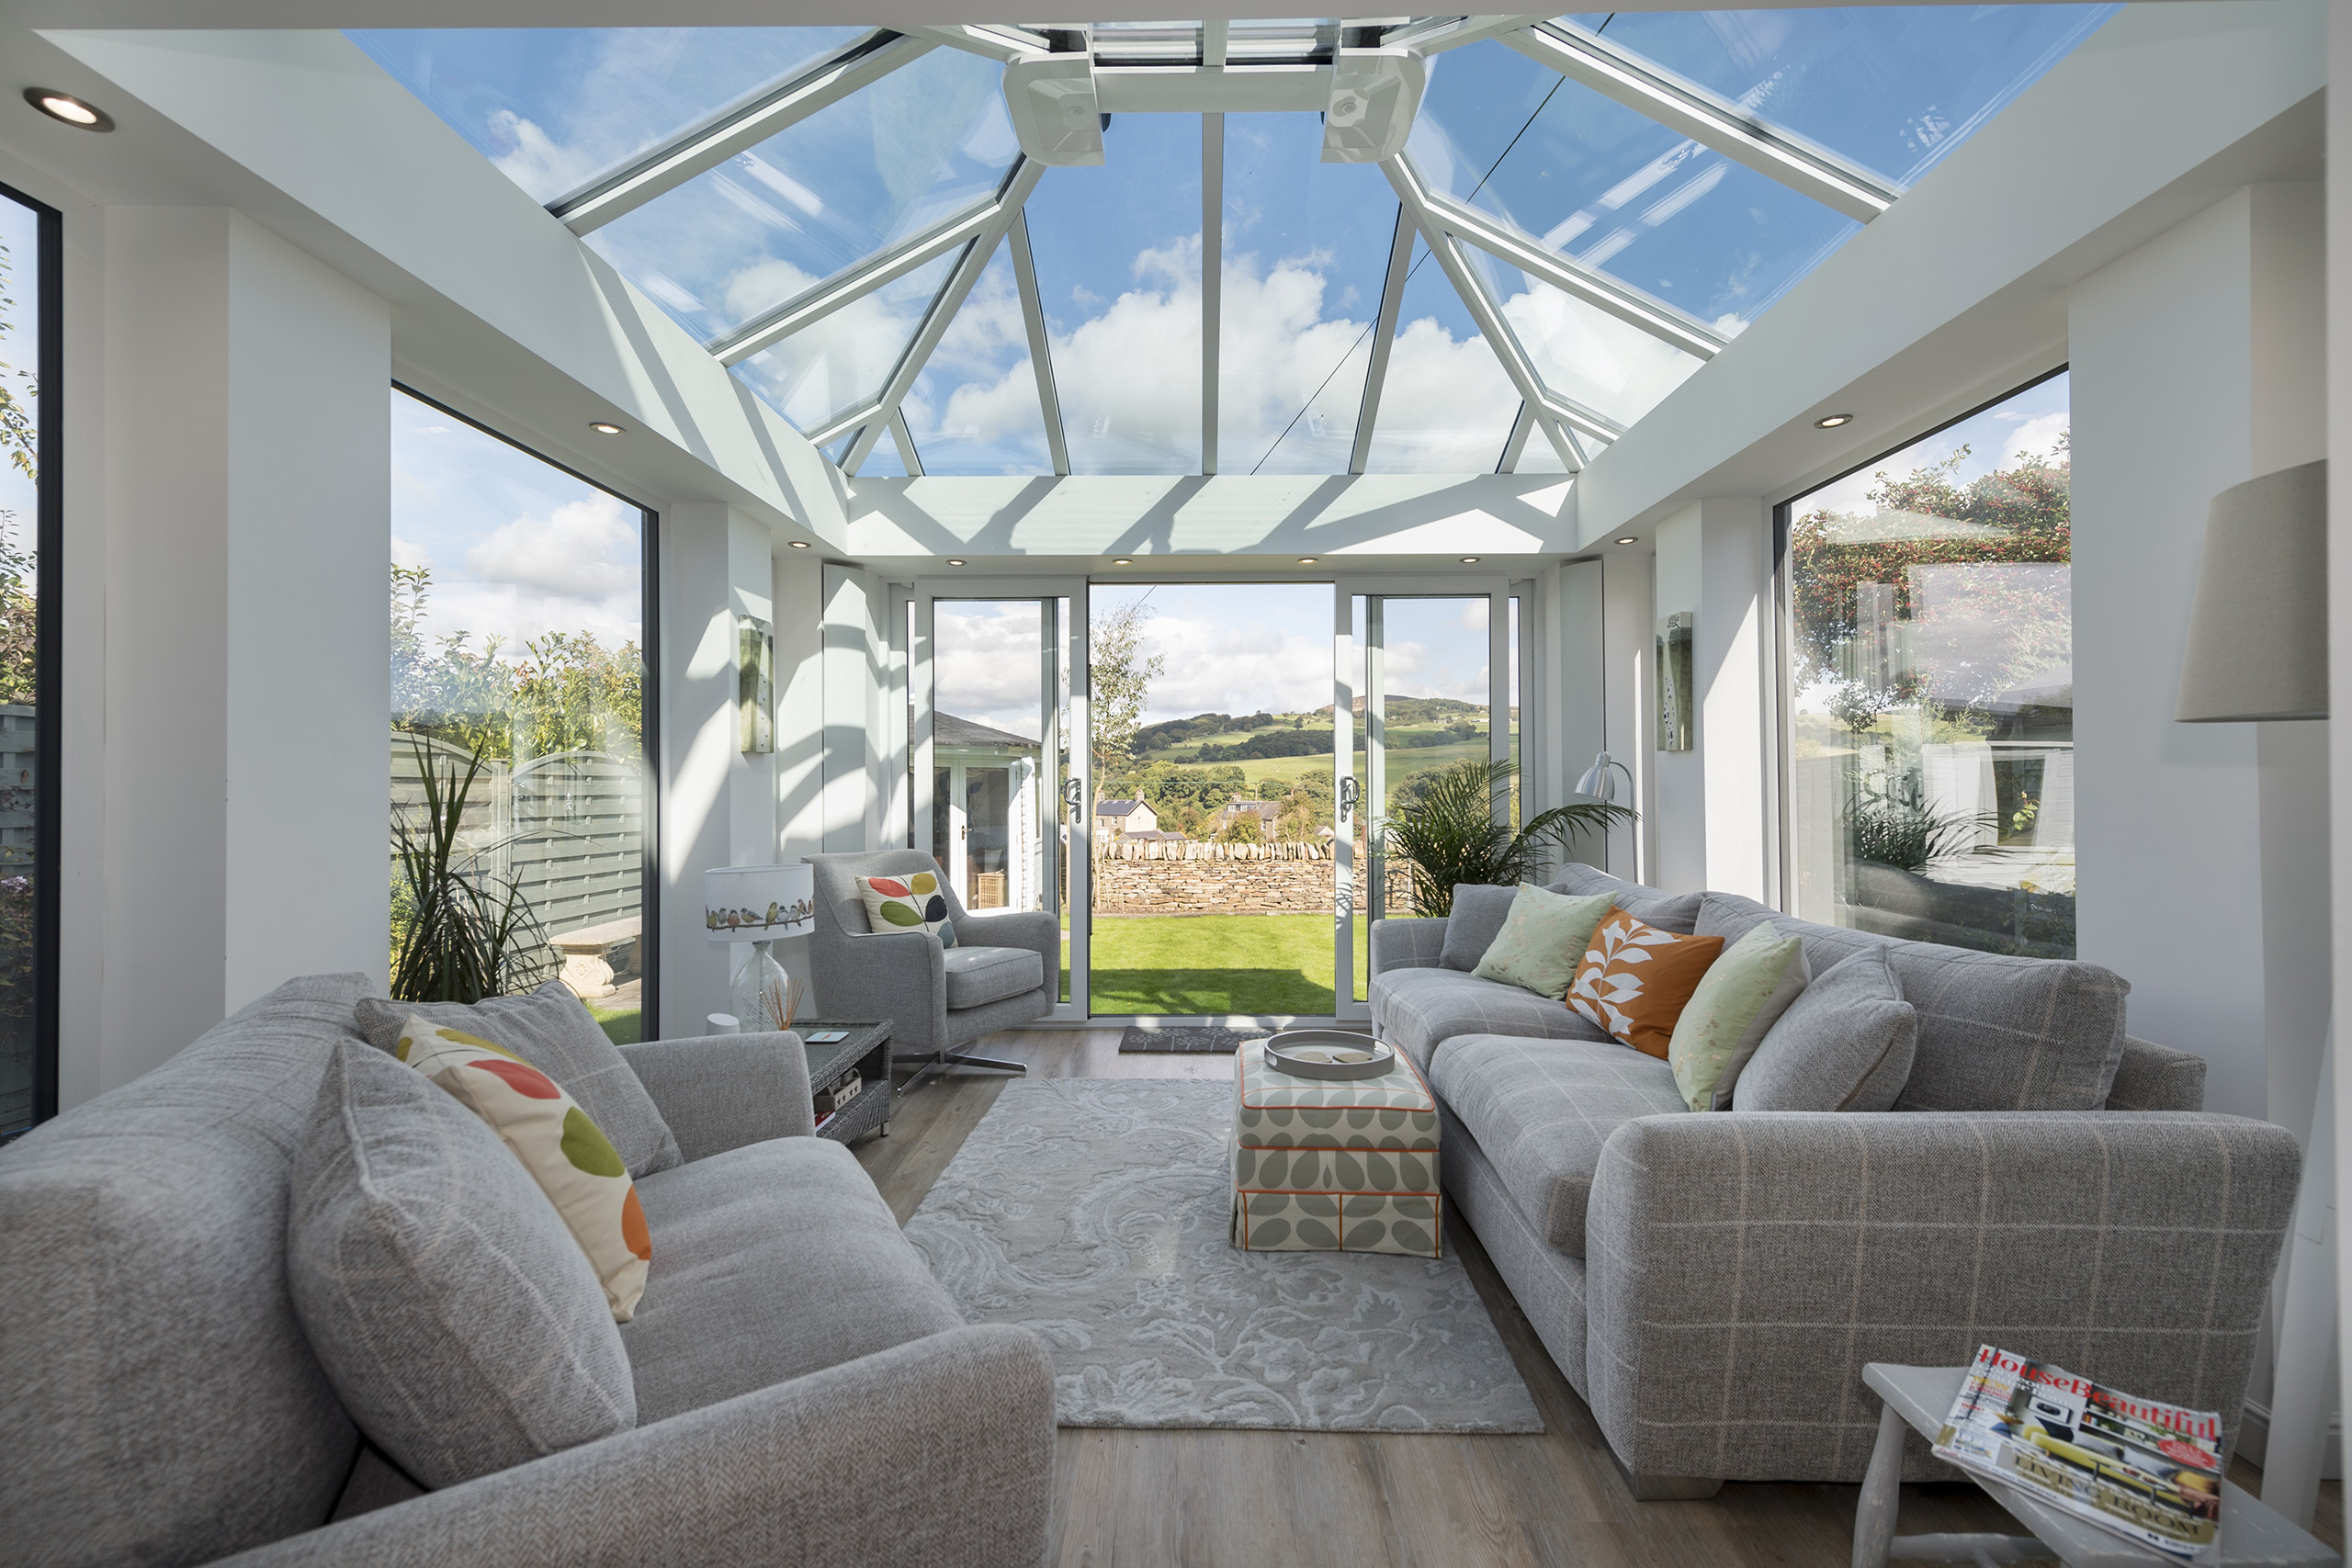 Conservatory or House Extension: Which One Is Right For You?